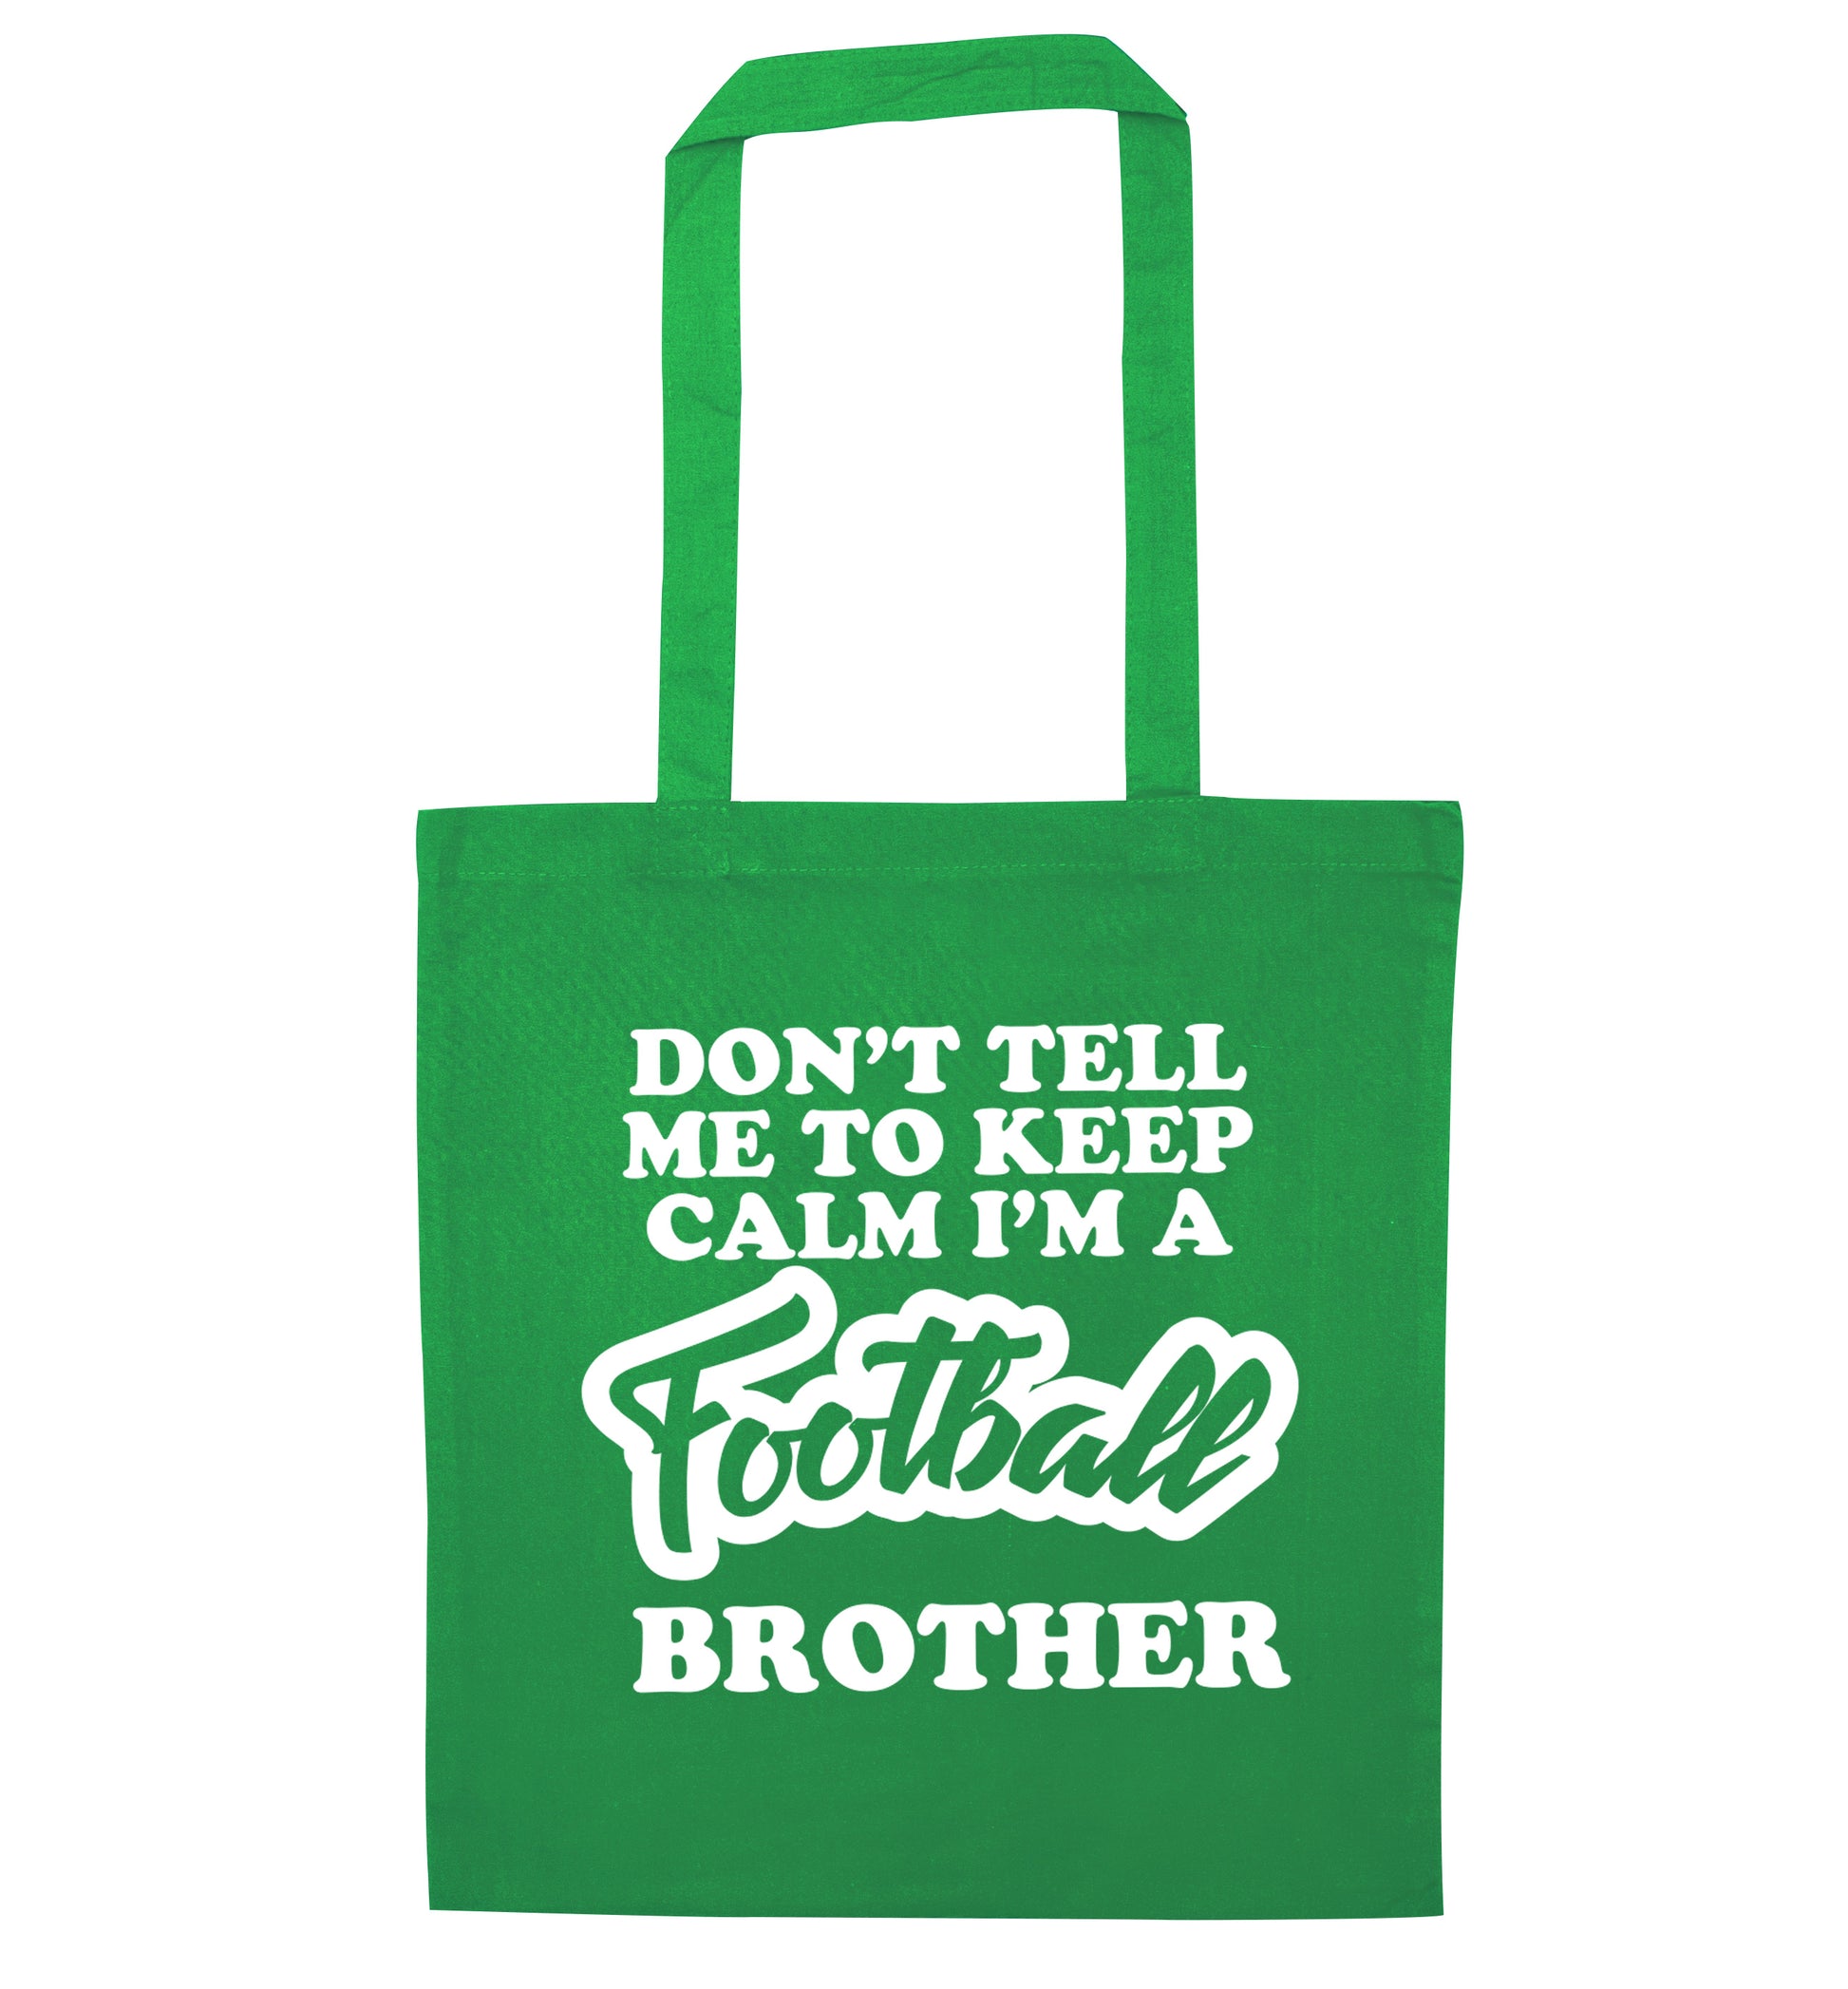 Don't tell me to keep calm I'm a football brother green tote bag